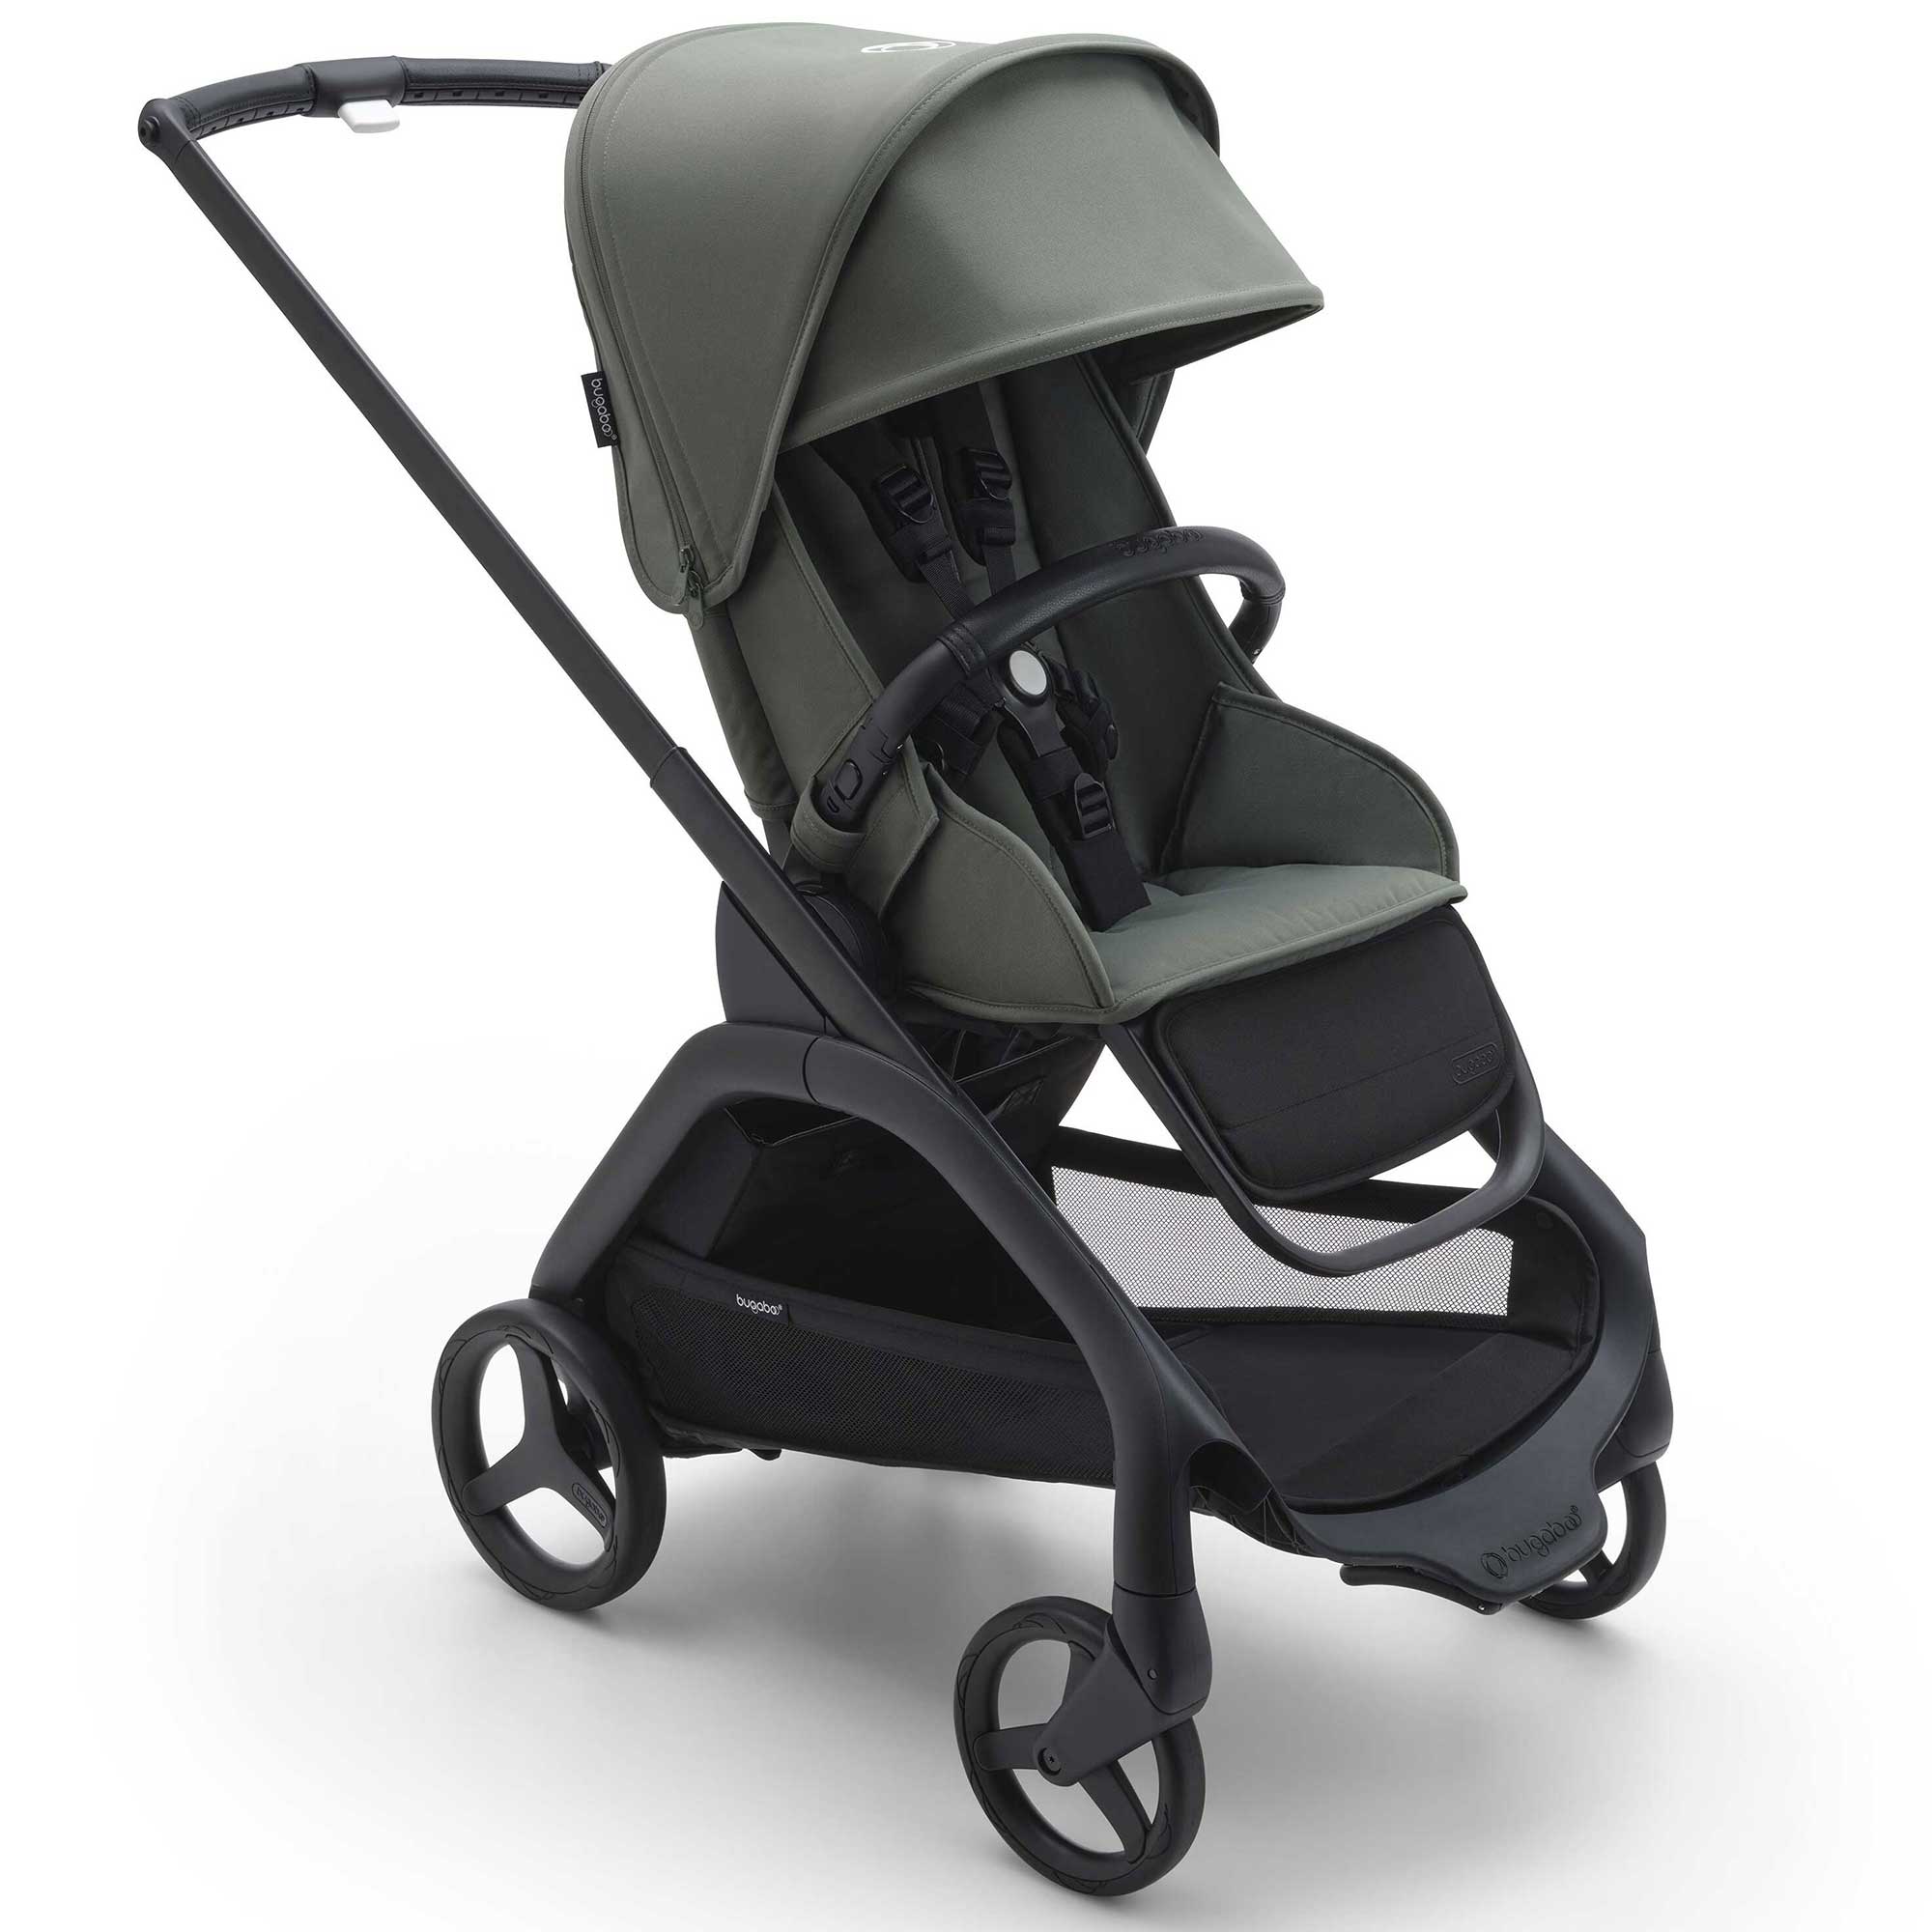 Bugaboo Travel Systems Bugaboo Dragonfly Ultimate Bundle - Black/Forest Green 13810-BLK-FOR-GRN